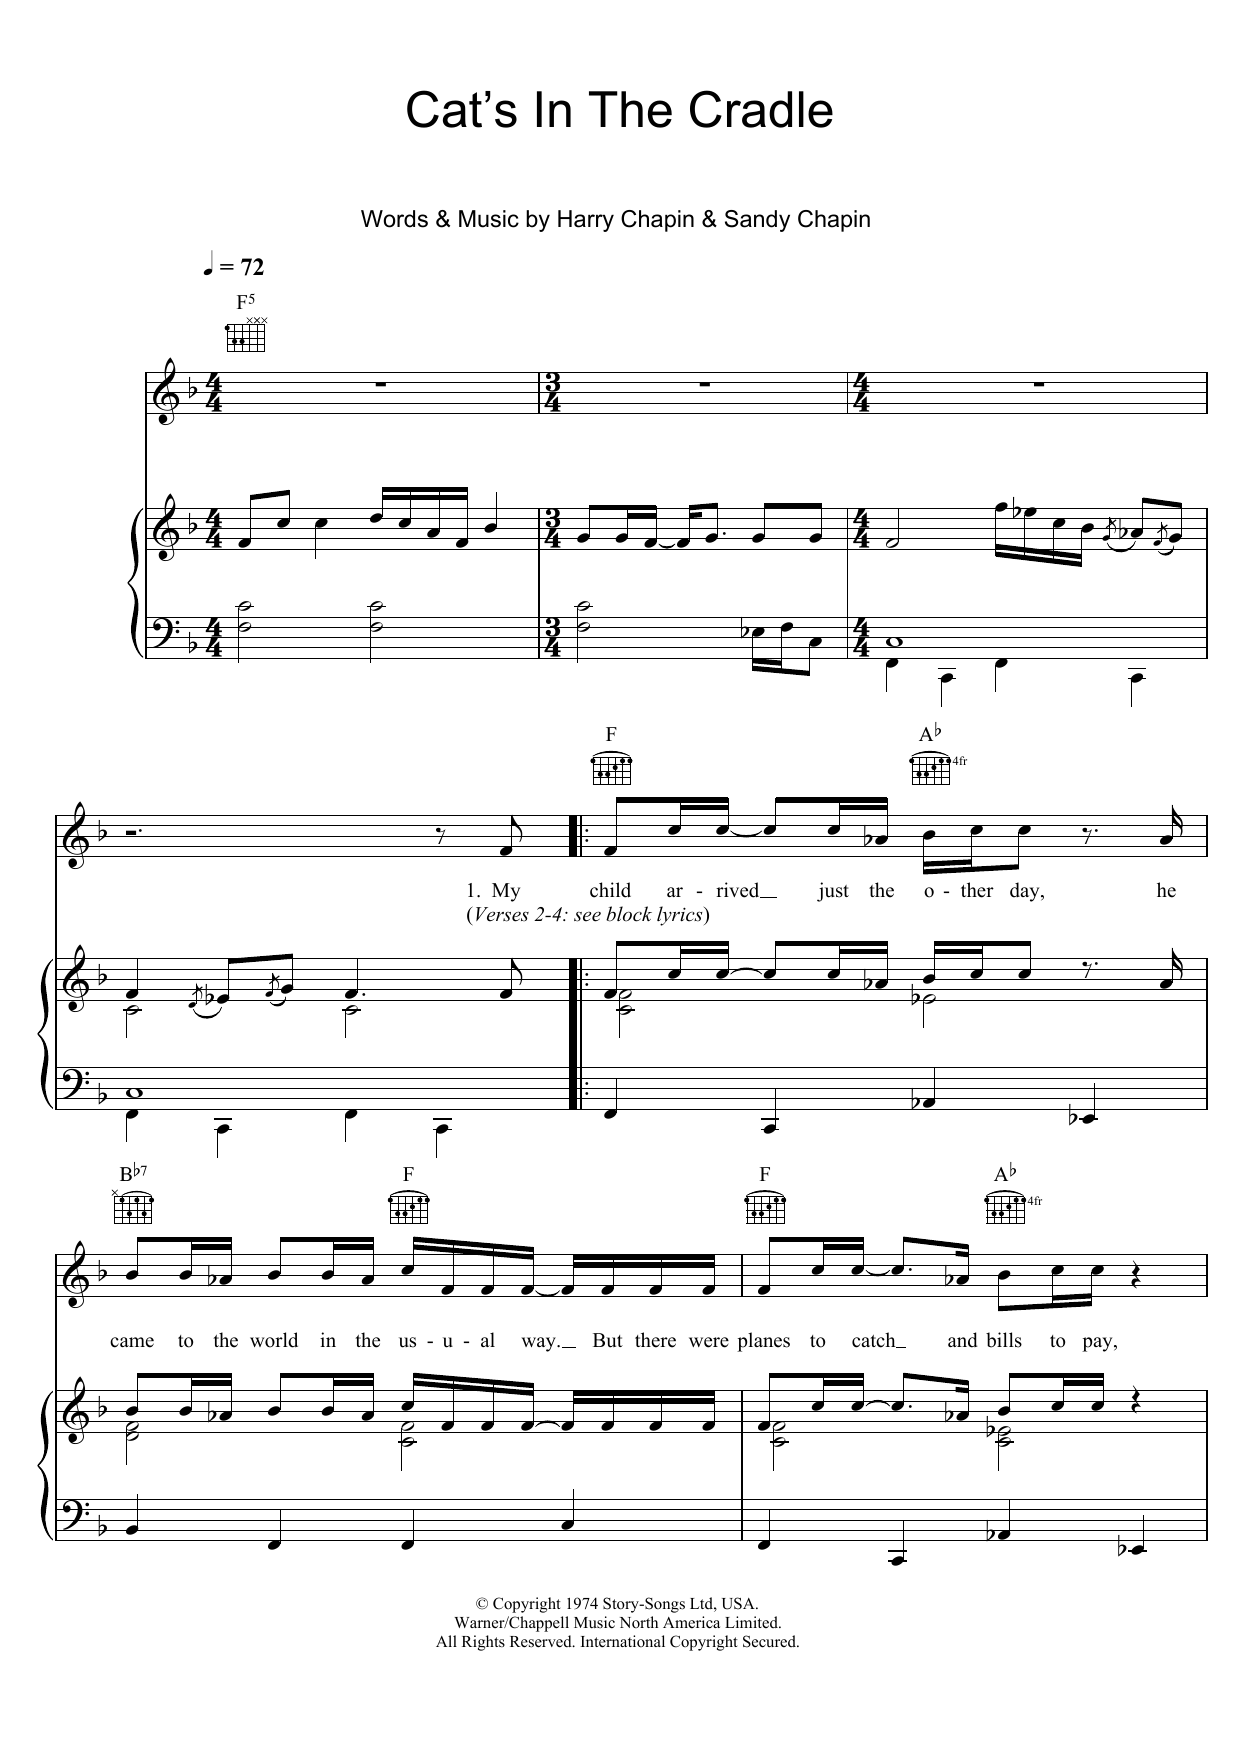 Harry Chapin Cat's In The Cradle sheet music notes and chords. Download Printable PDF.